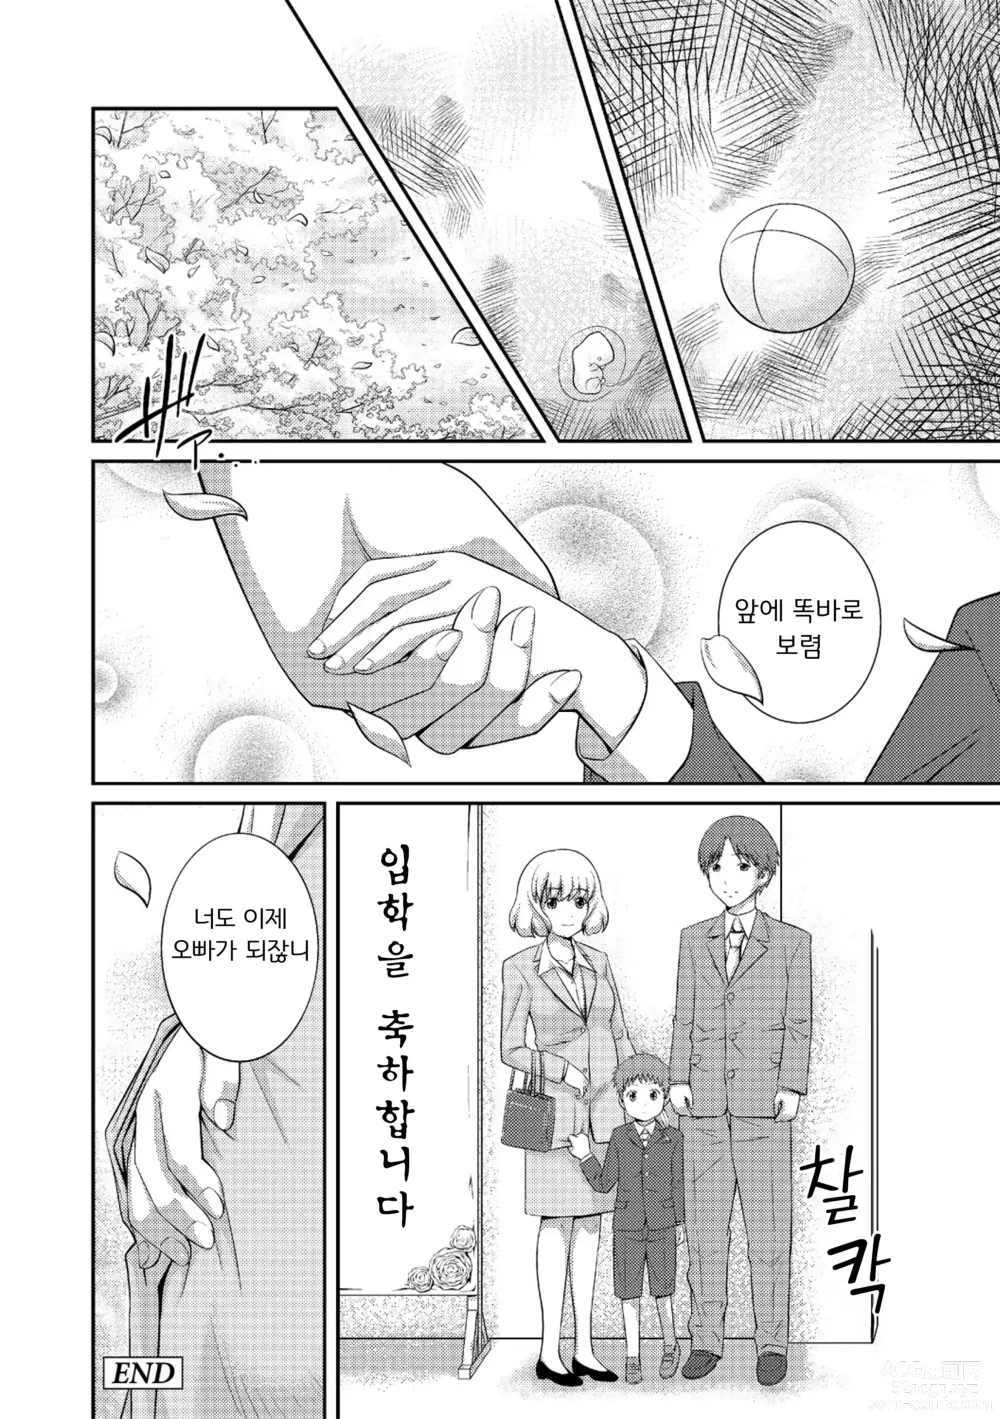 Page 115 of manga 누나♥LOVER Ch. 01-06